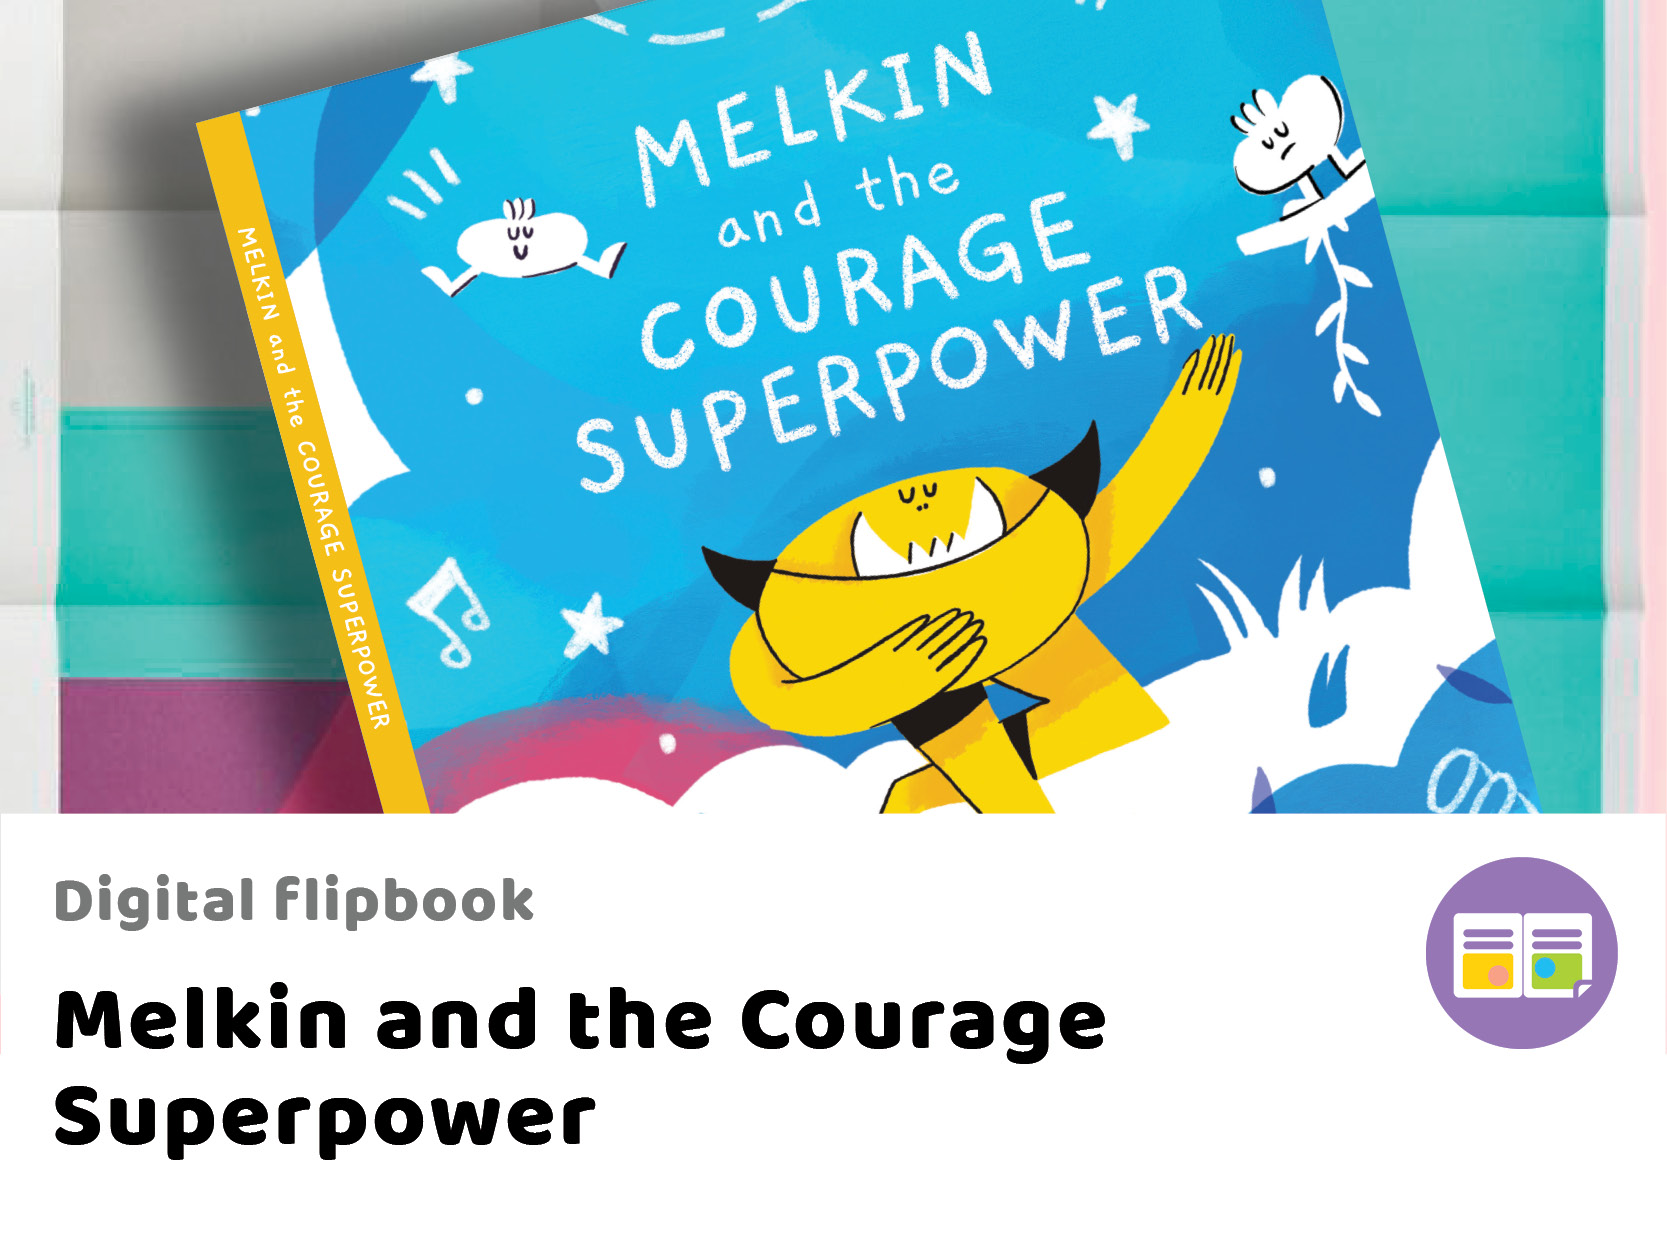 Melkin and the Courage Superpower